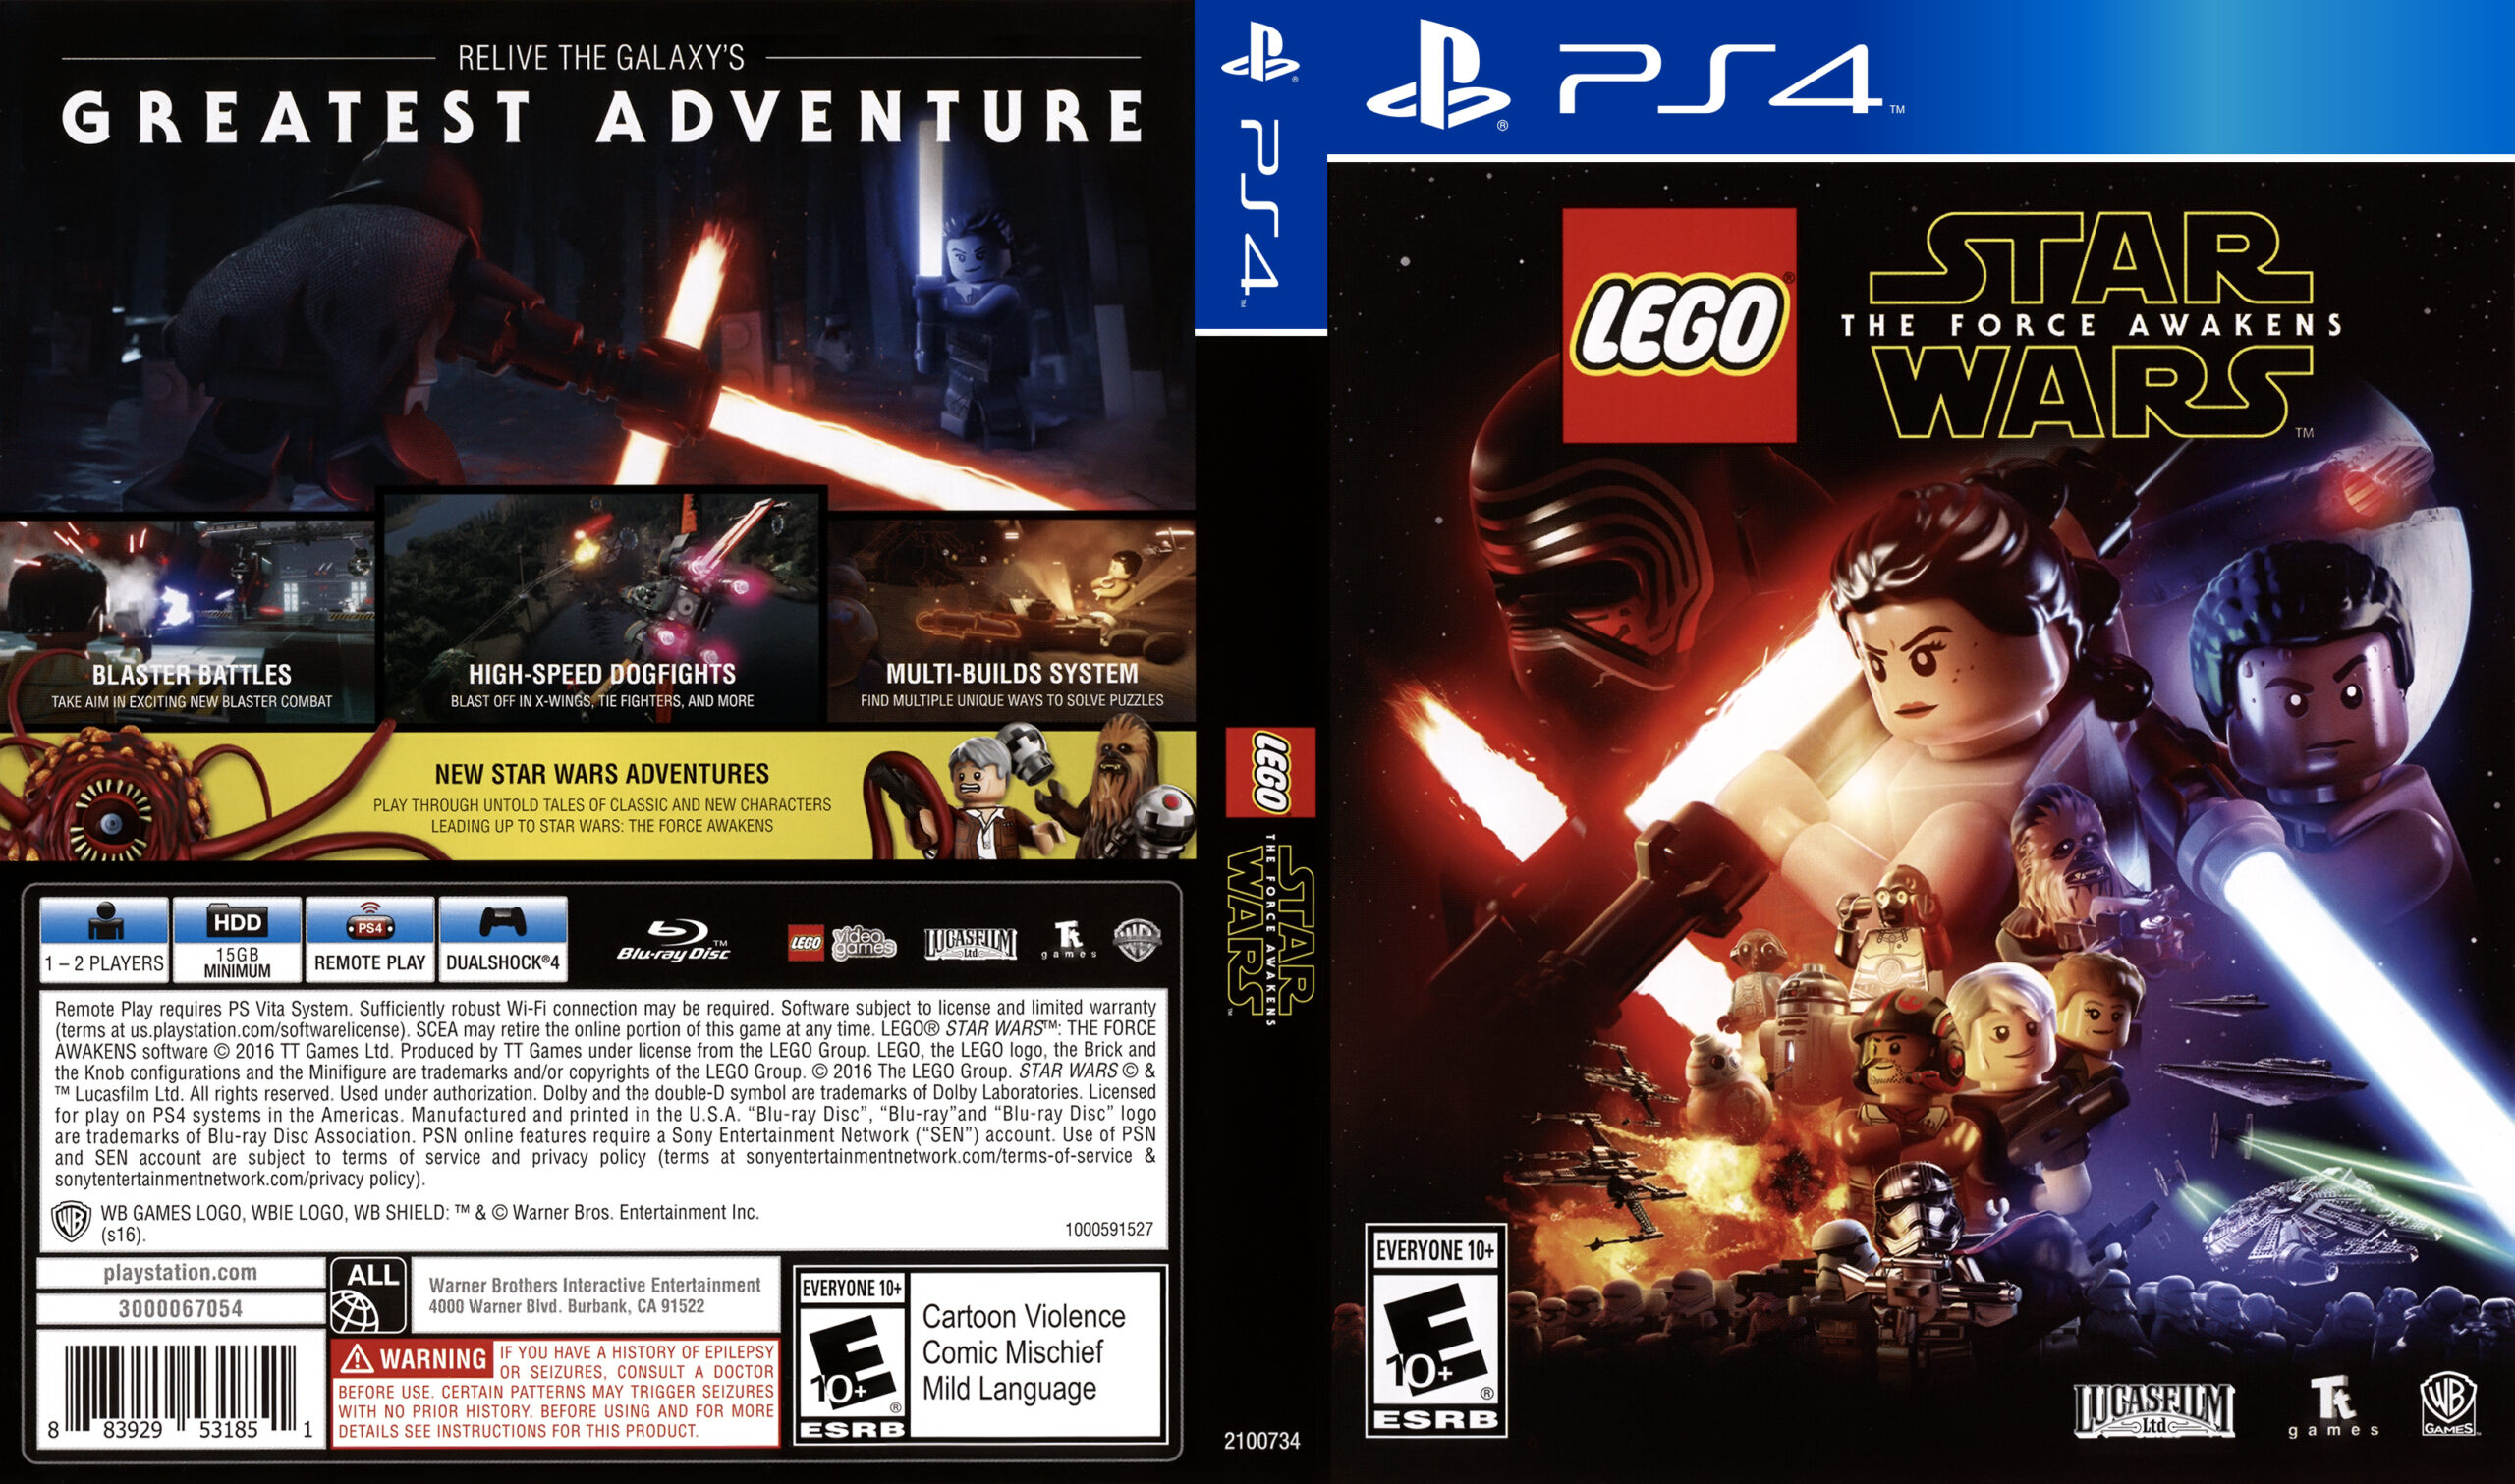 LEGO Star Wars The Force Awakens A0100 V0100 CUSA03397 PS4 PKG